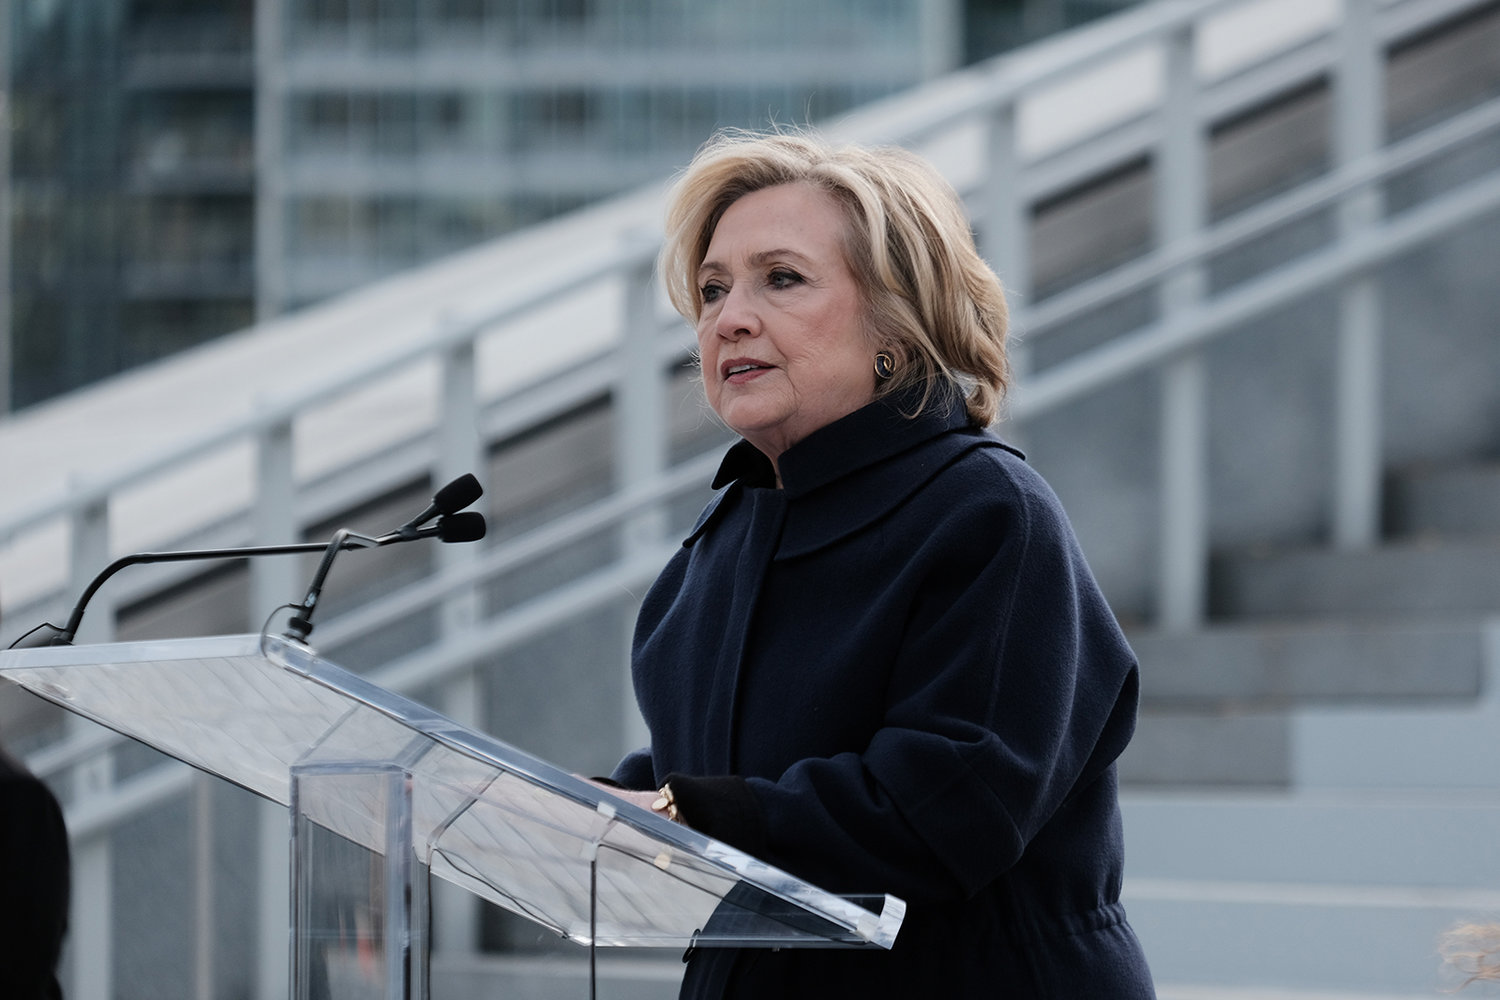 Former U.S. Secretary of State Hillary Clinton speaks at the opening of the Eyes on Iran art exhibition at Roosevelt Island's FDR Four Freedoms State Park on Nov. 28, 2022, in New York City. The exhibition includes numerous installations in support of the Woman, Life, Freedom campaign against gender-based violence in Iran. (Spencer Platt/Getty Images/TNS)